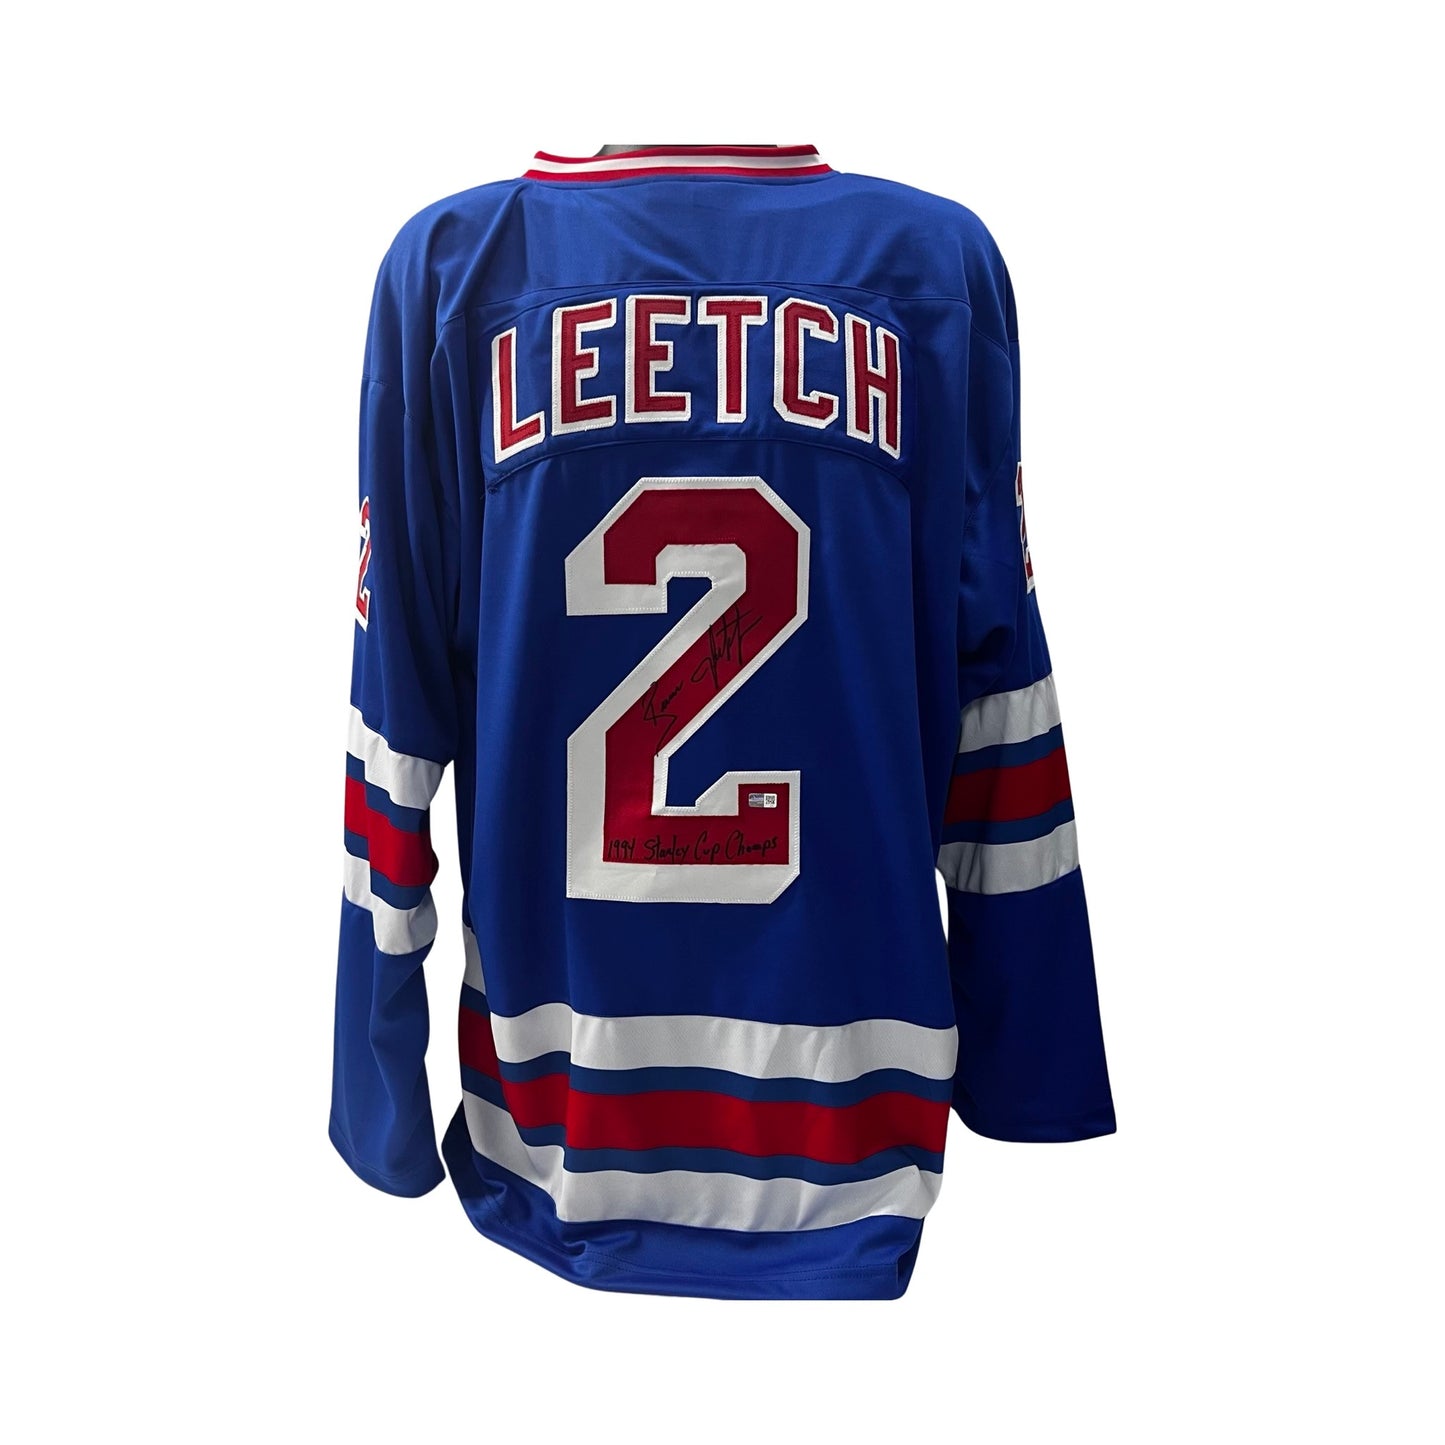 Brian Leetch Autographed New York Rangers Blue Jersey “1994 Stanley Cup Champs” Inscription Steiner CX